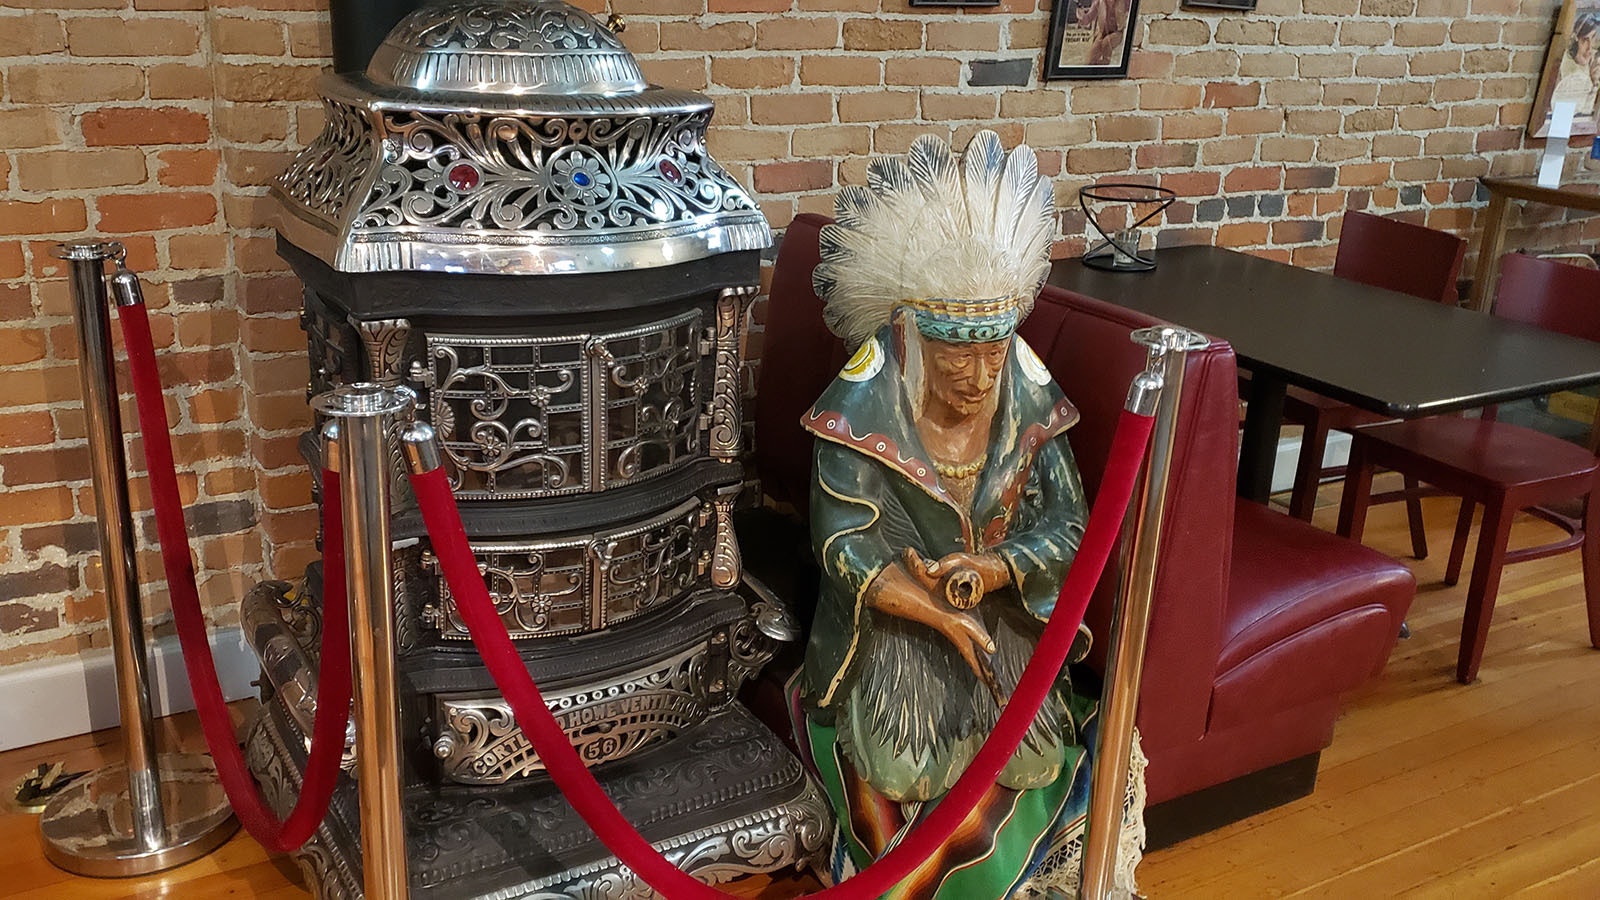 The Indian sitting quietly by the fancy wood stove gets lots of comments from guest at Pie Zanos in Buffalo.